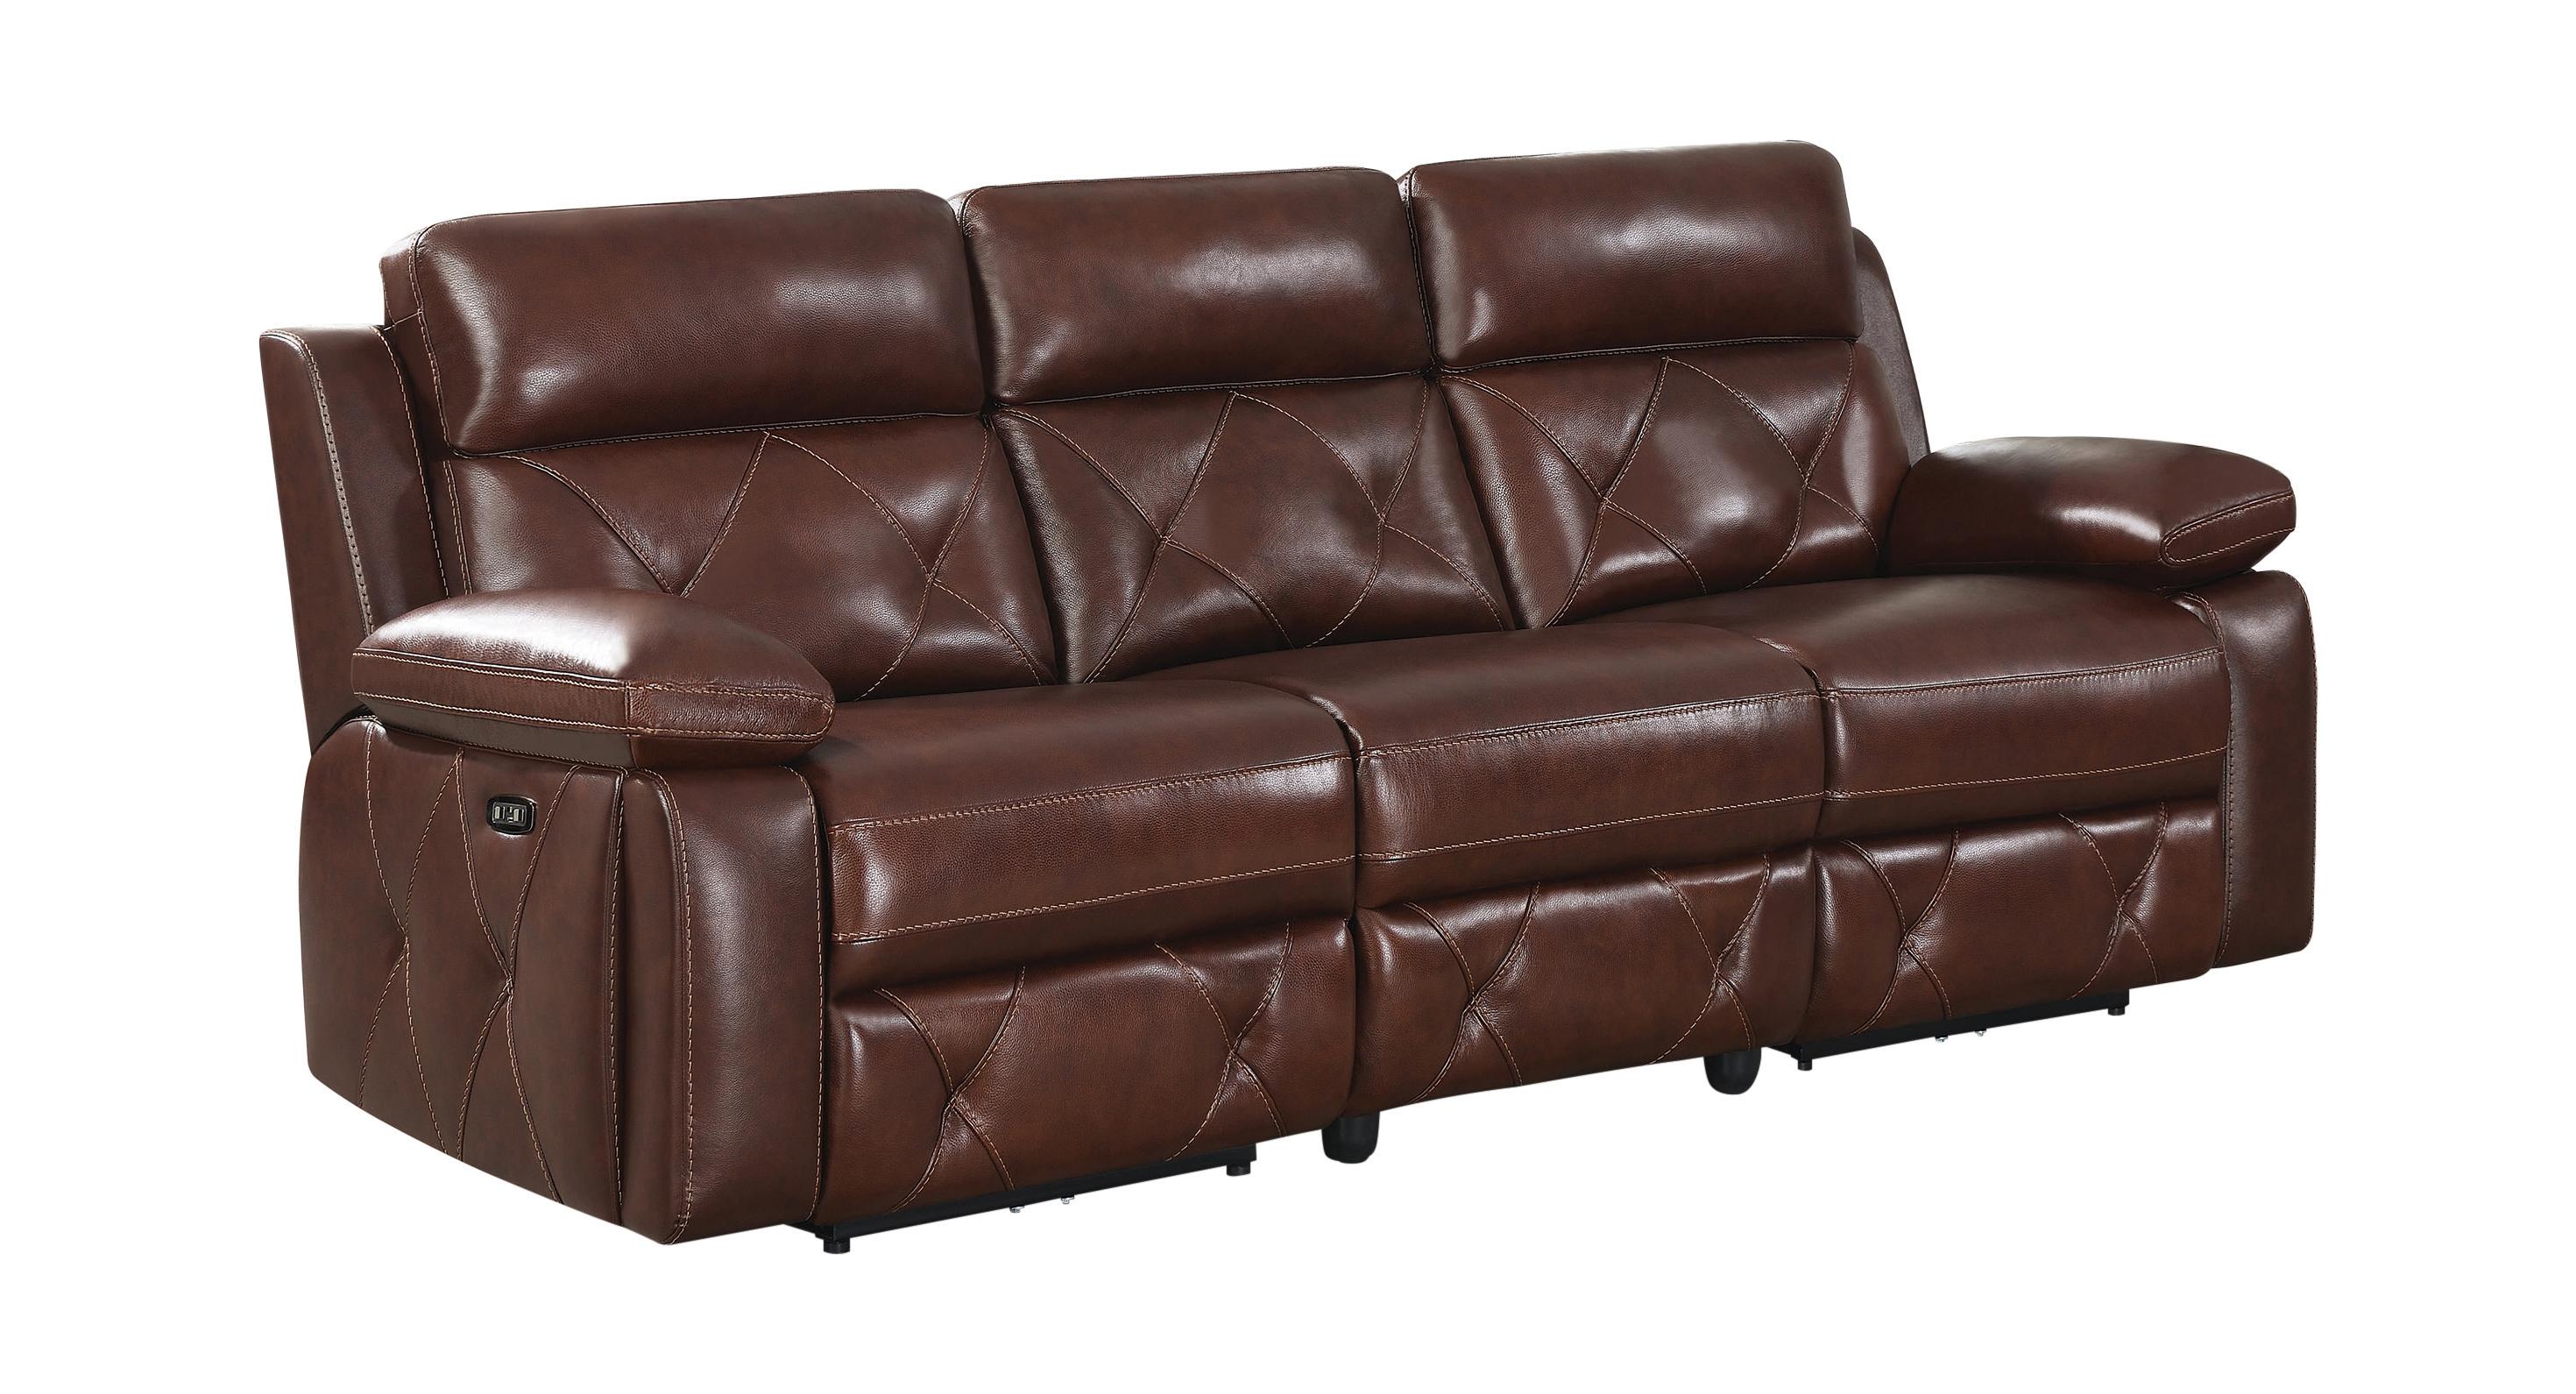 Contemporary Power Reclining Sofa 603441PP Chester 603441PP in Chocolate Leather